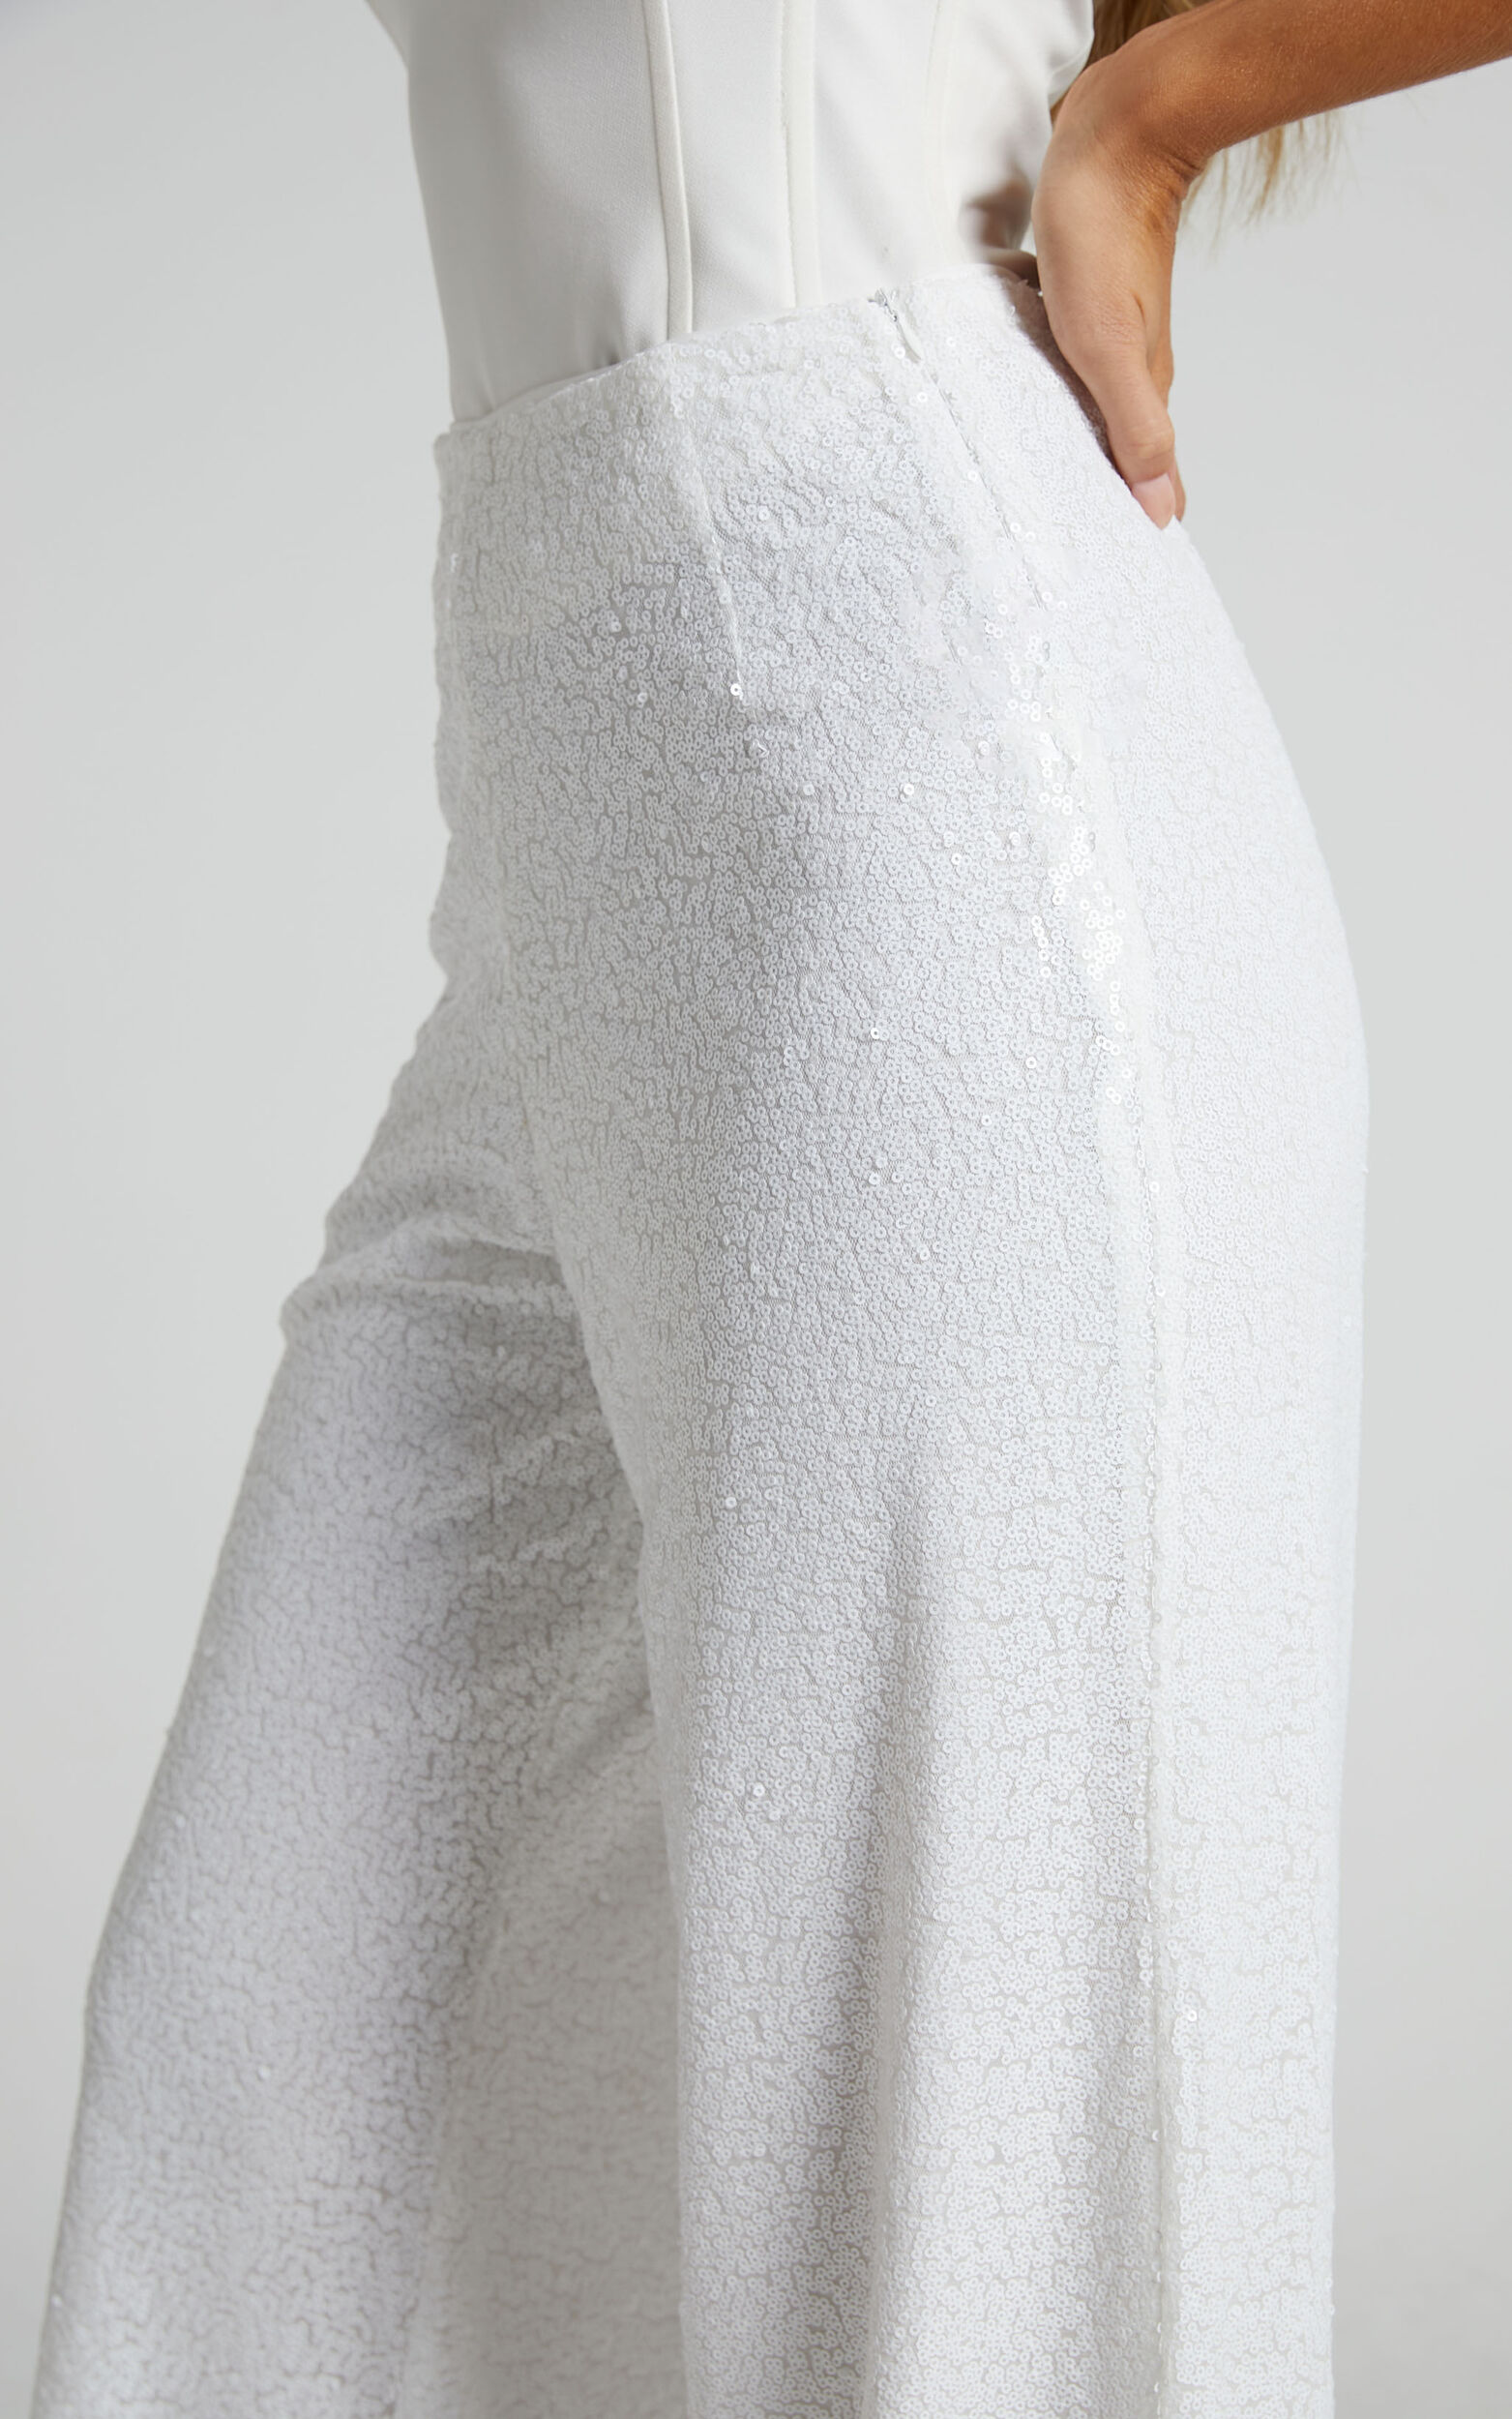 Looma Sequin Pants - High Waisted Super Wide Leg Pants in White